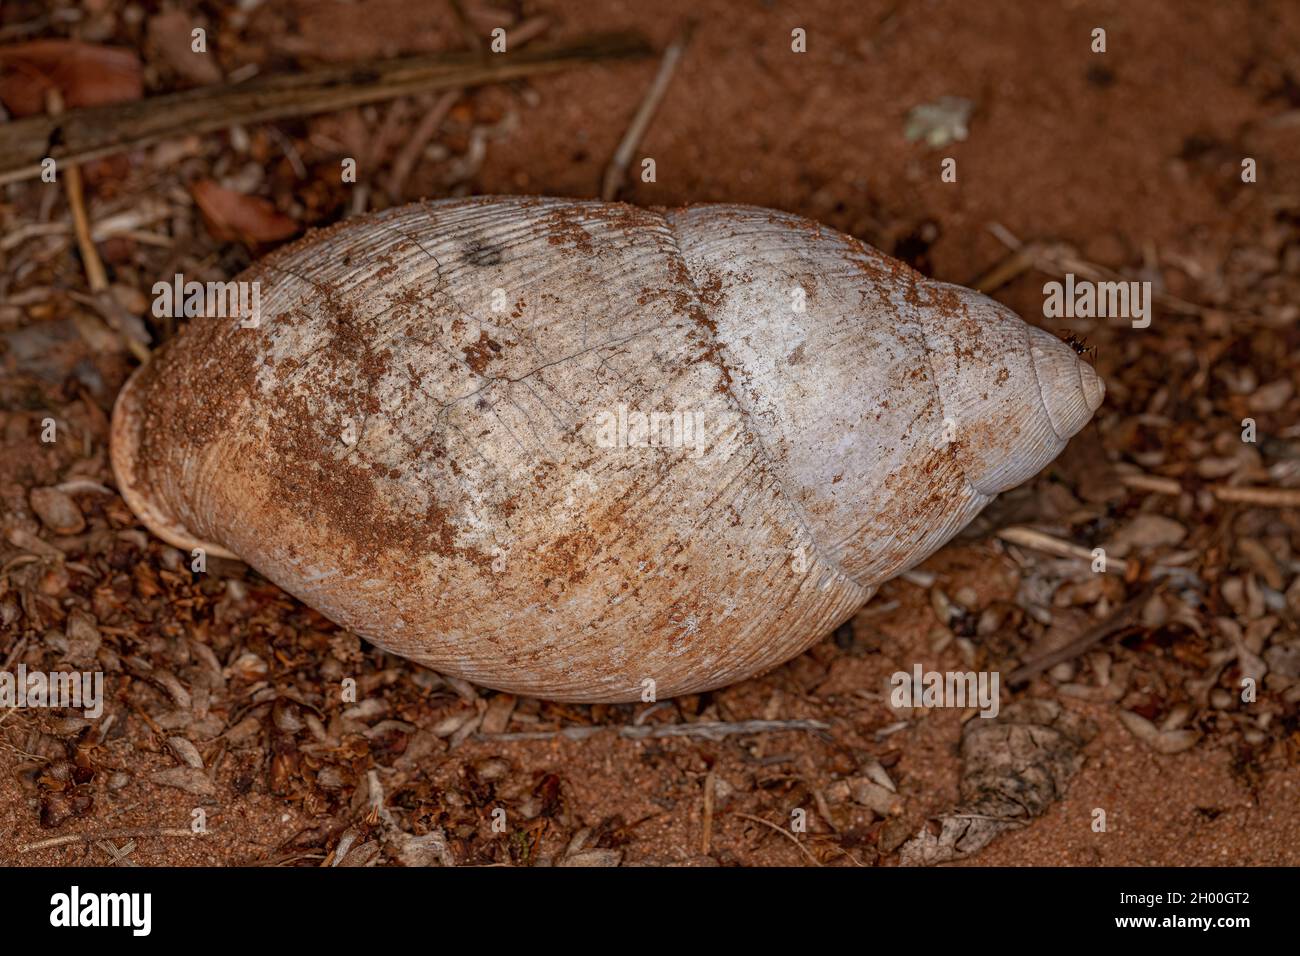 shell of Common Land Snail of the Genus Megalobulimus Stock Photo